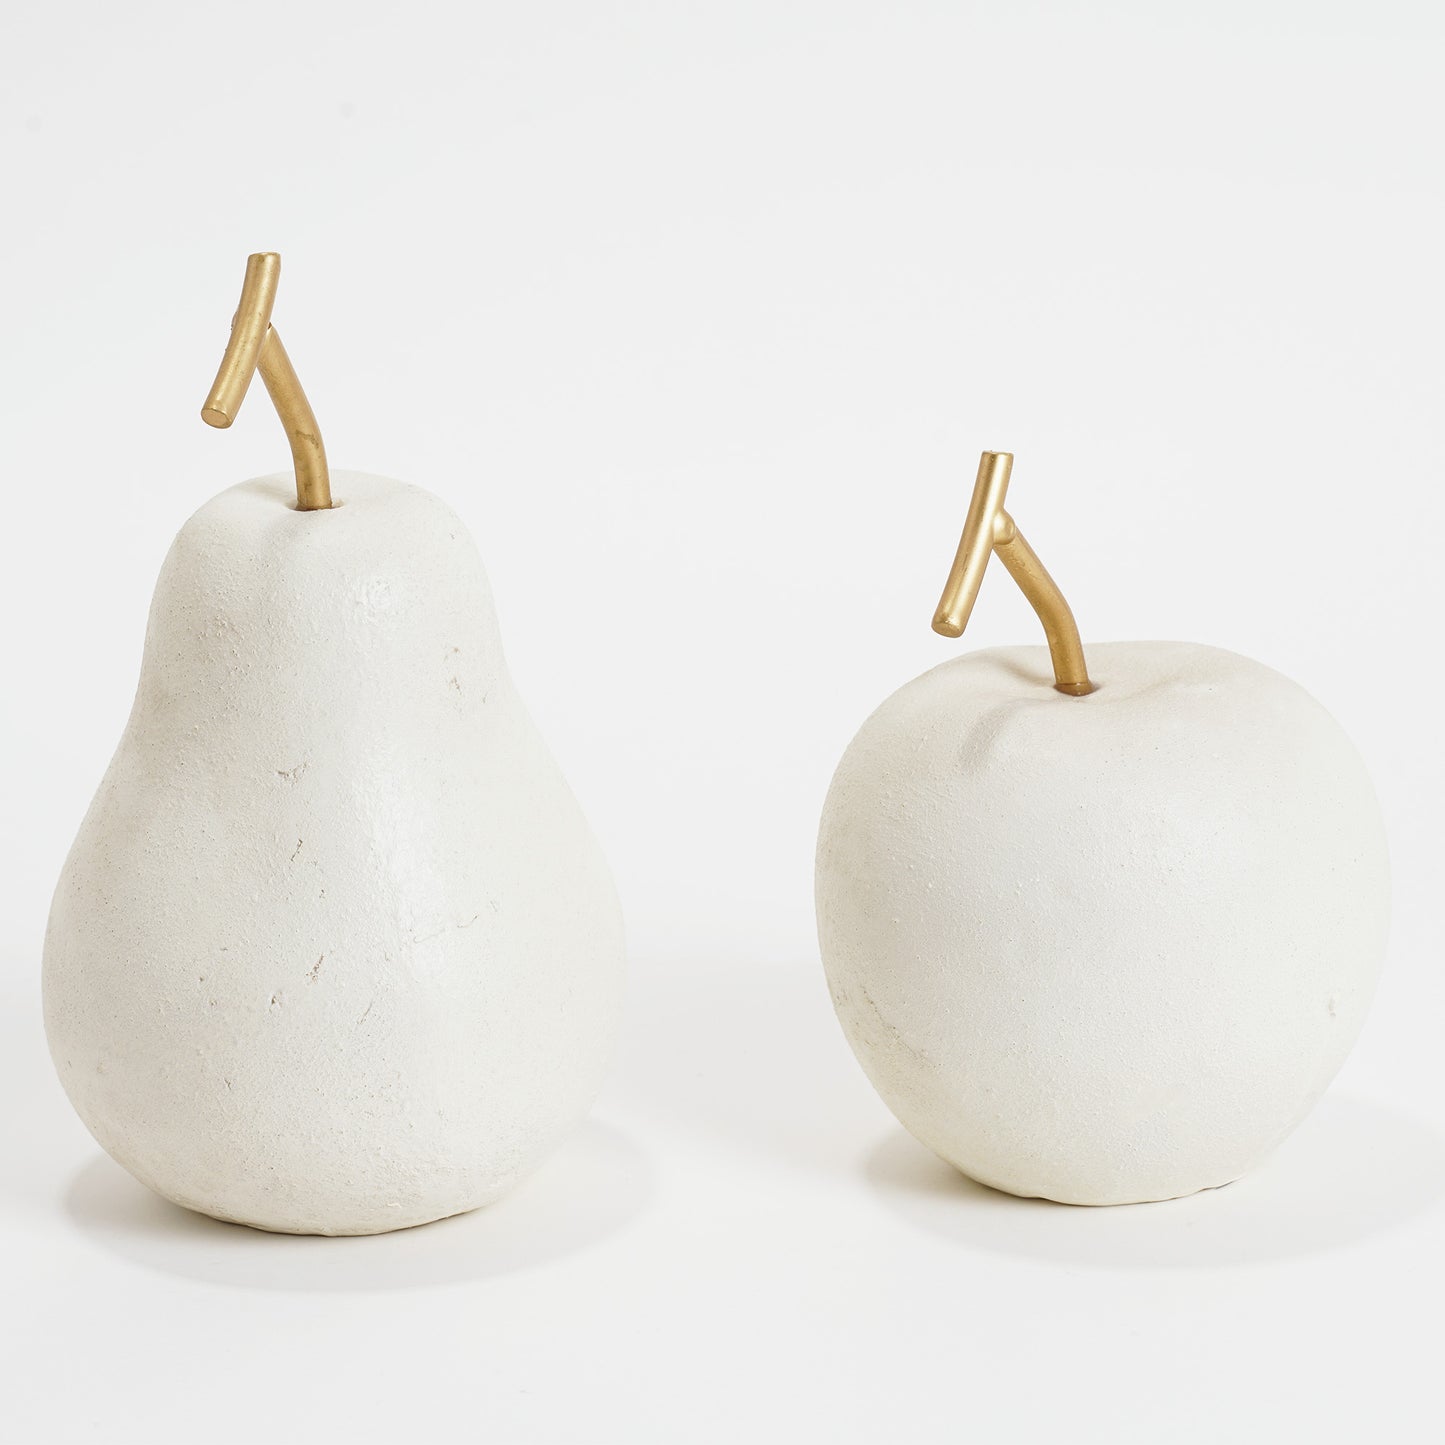 Resin Apple And Pear Fruit Tabletop Decor, Set Of 2